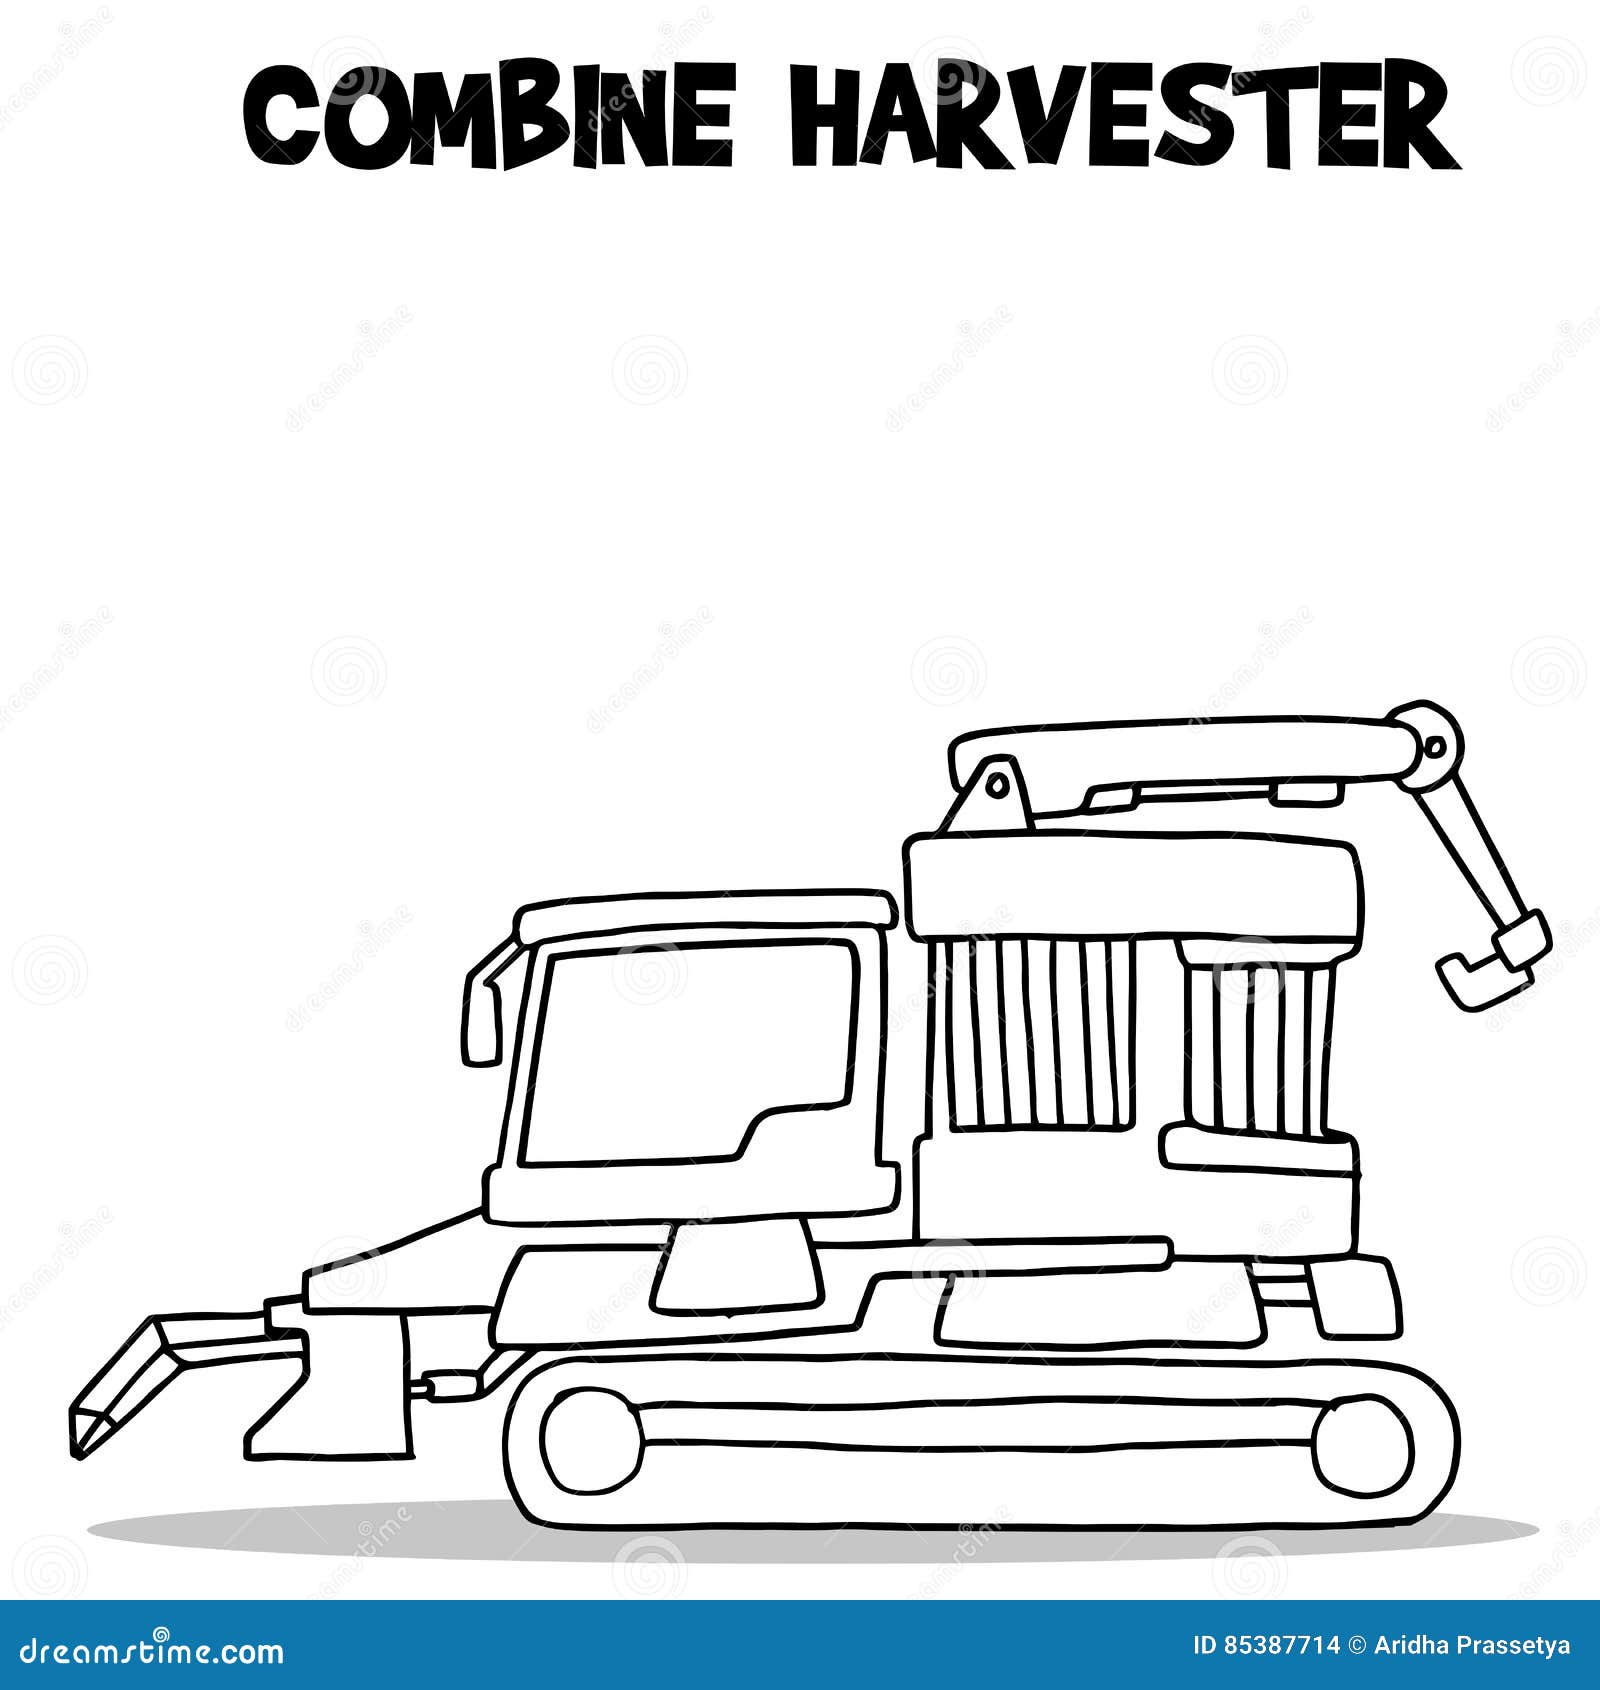 Combine harvester stock vector. Illustration of agriculture - 39973346